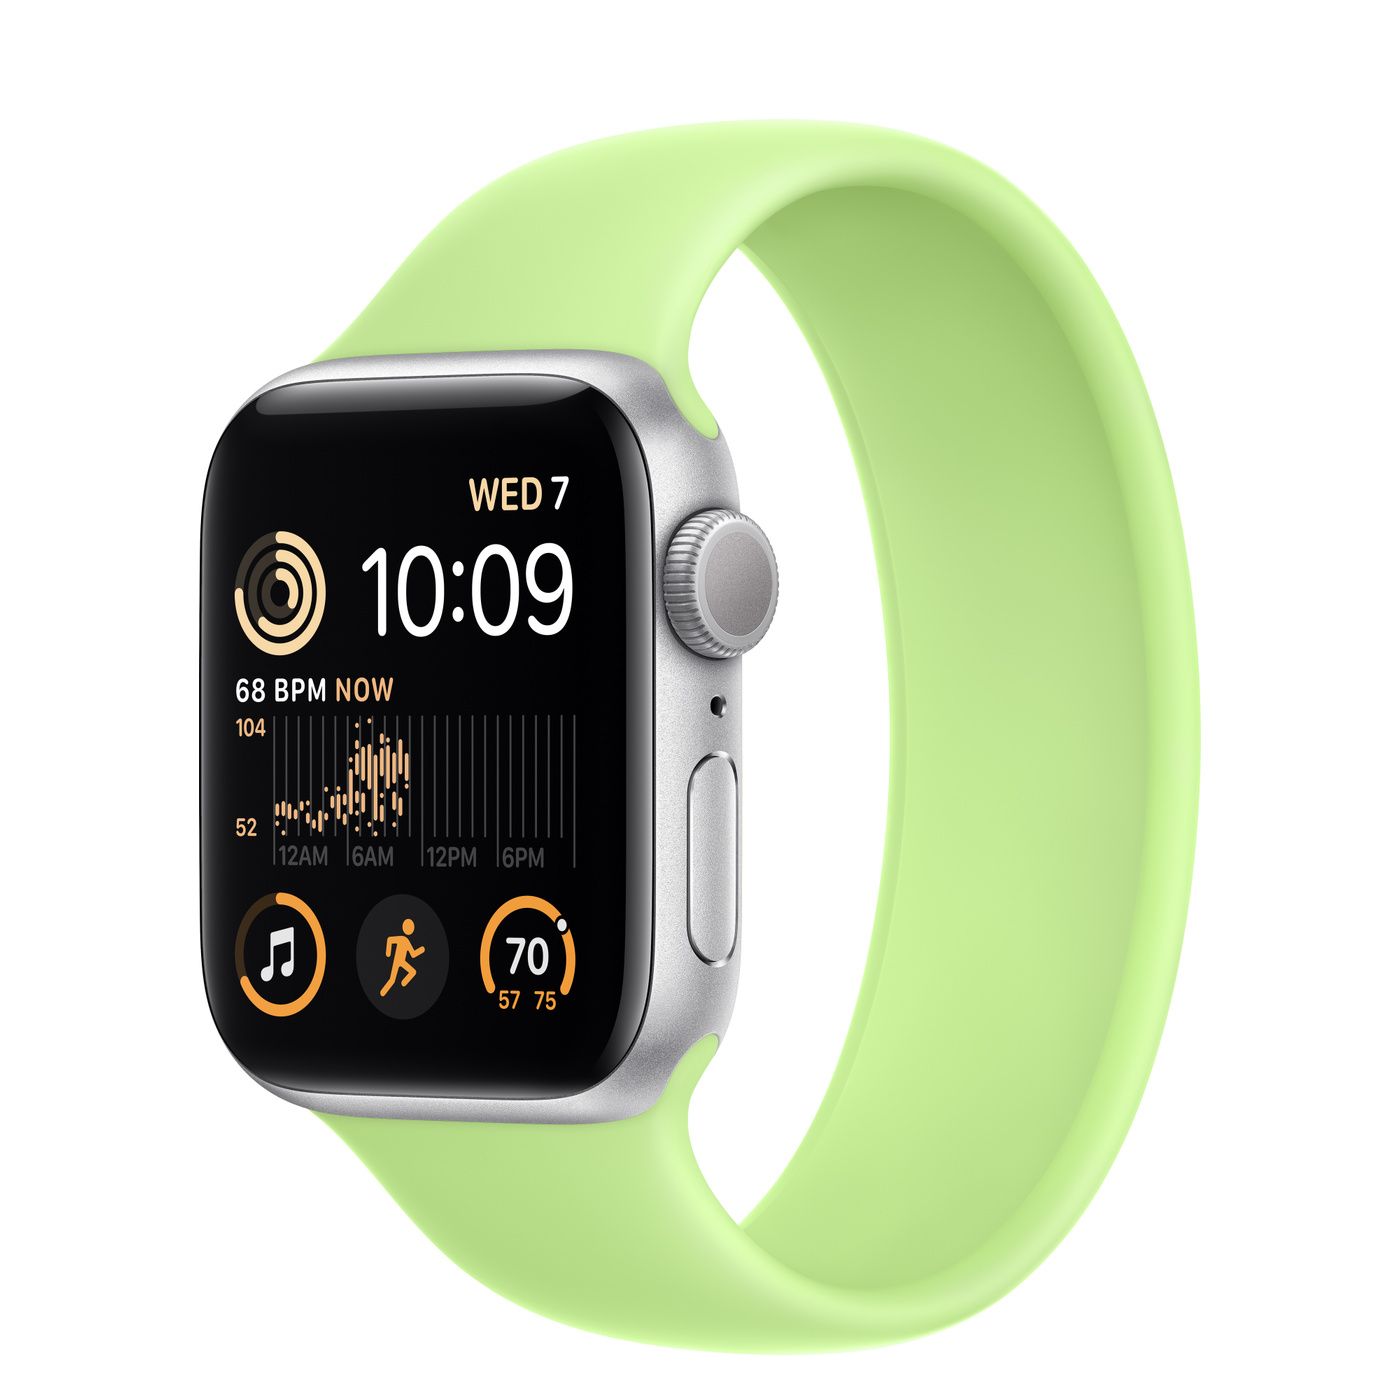 Apple Watch SE with green sports band on a white background